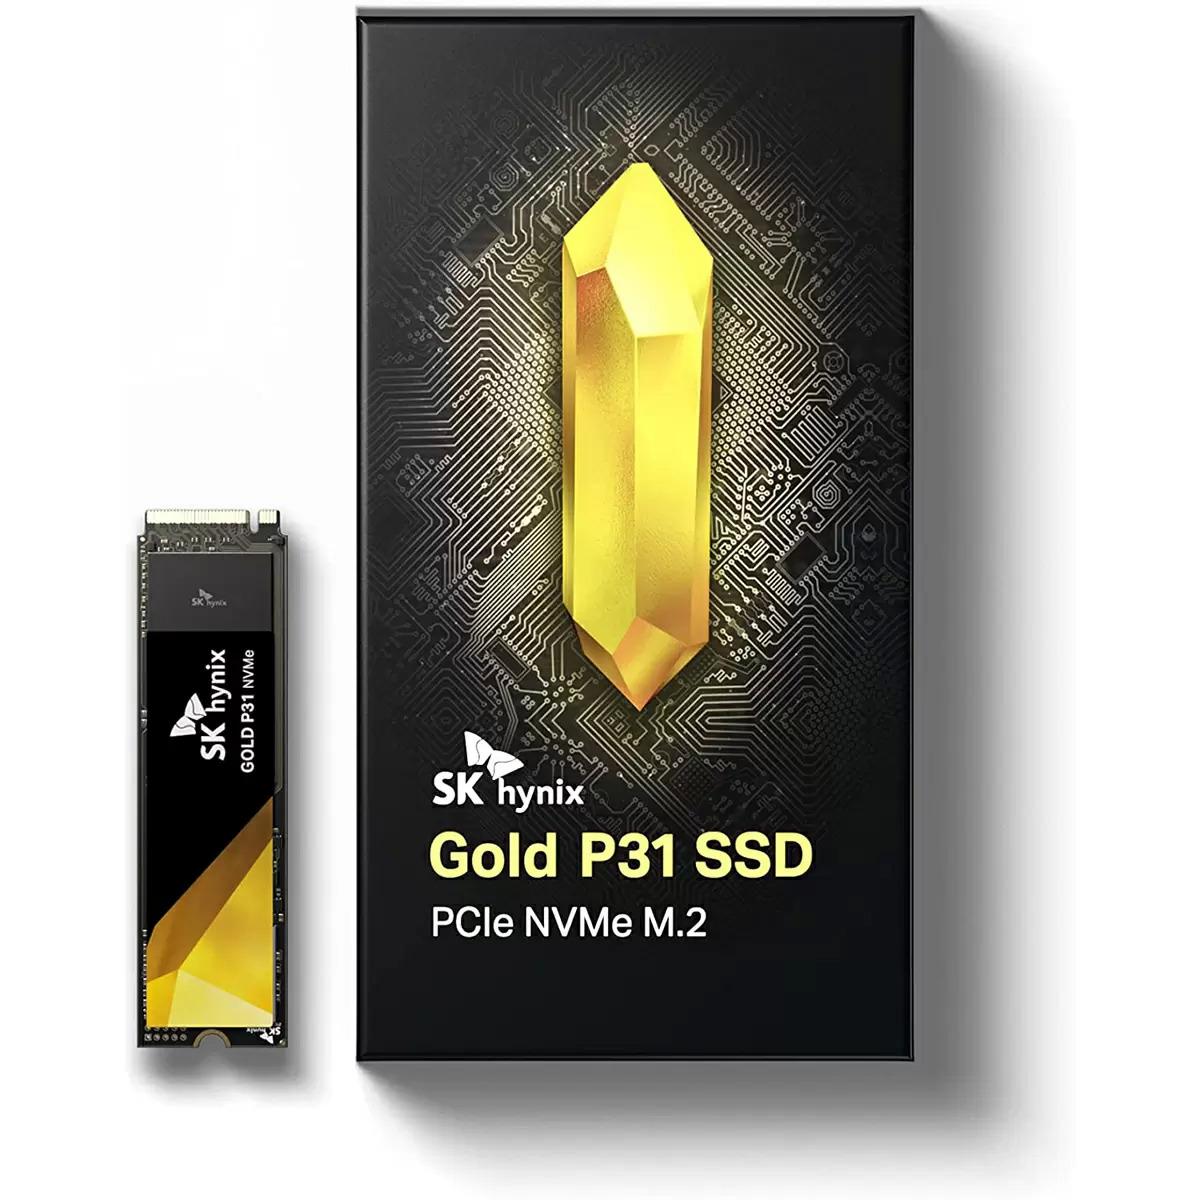 1TB SK hynix Gold P31 PCIe NVMe Solid State Drive SSD for $86.39 Shipped